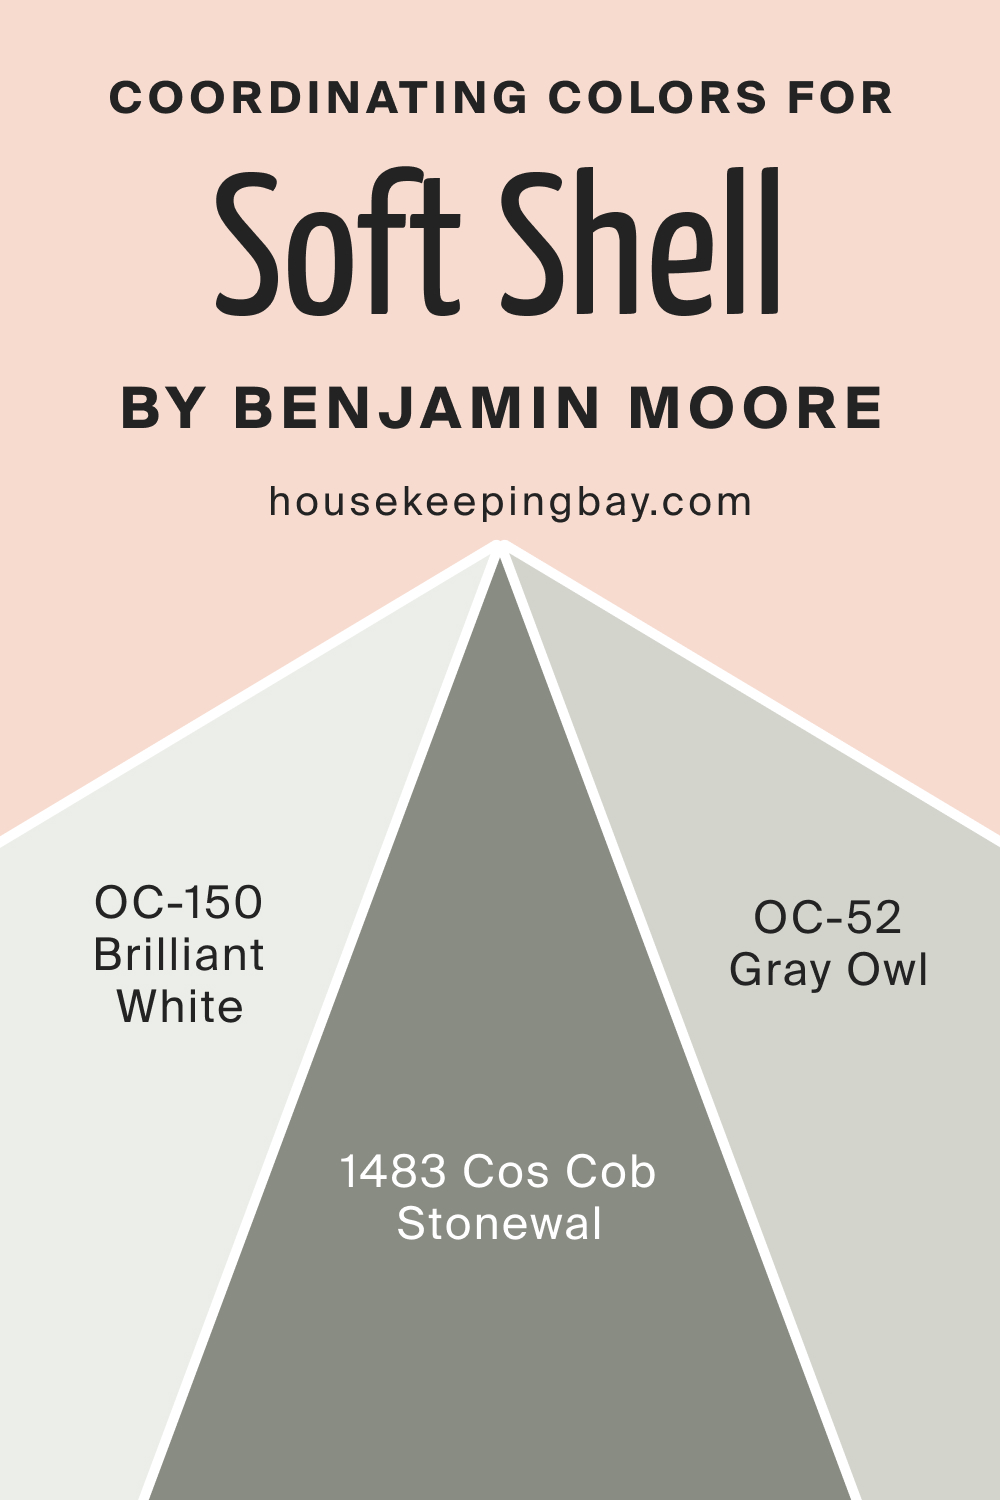 Coordinating Colors for Soft Shell 015 by Benjamin Moore